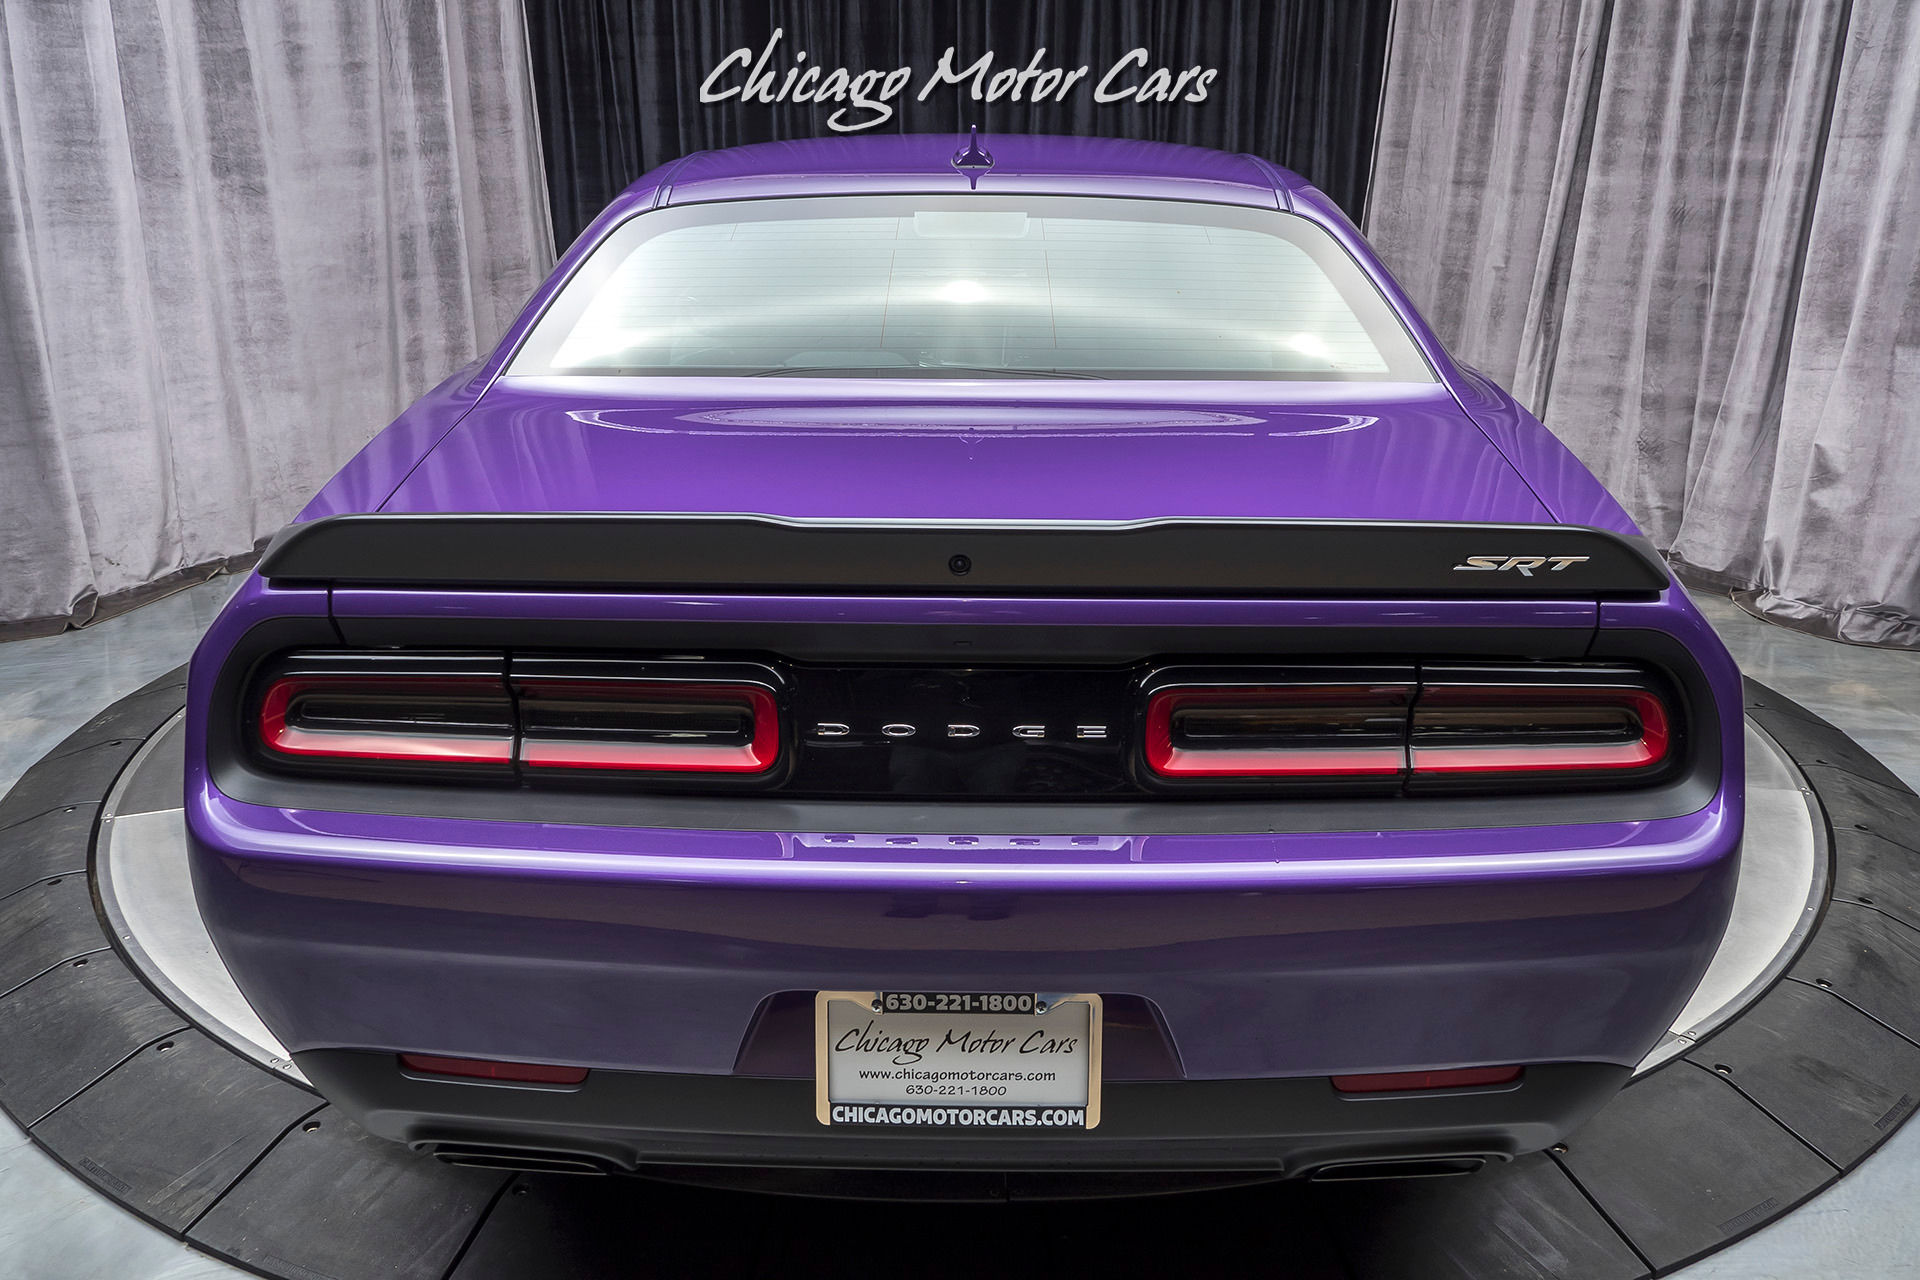 Used-2018-Dodge-Challenger-SRT-Demon-Coupe-DELIVERY-MILES-DEMON-CRATE-INCLUDED